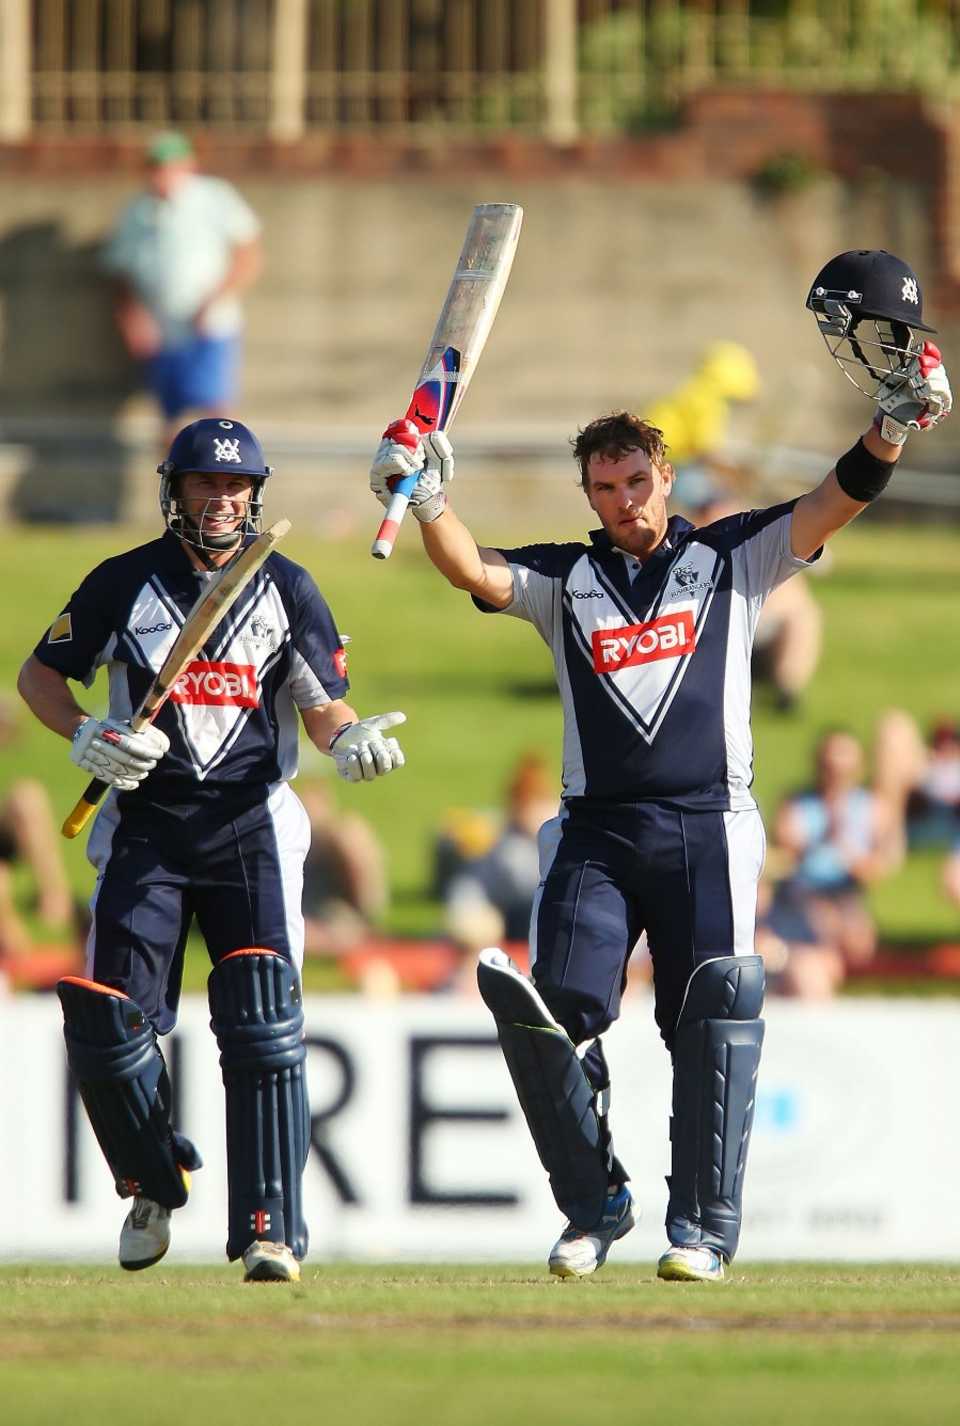 Aaron Finch and David Hussey both scored centuries